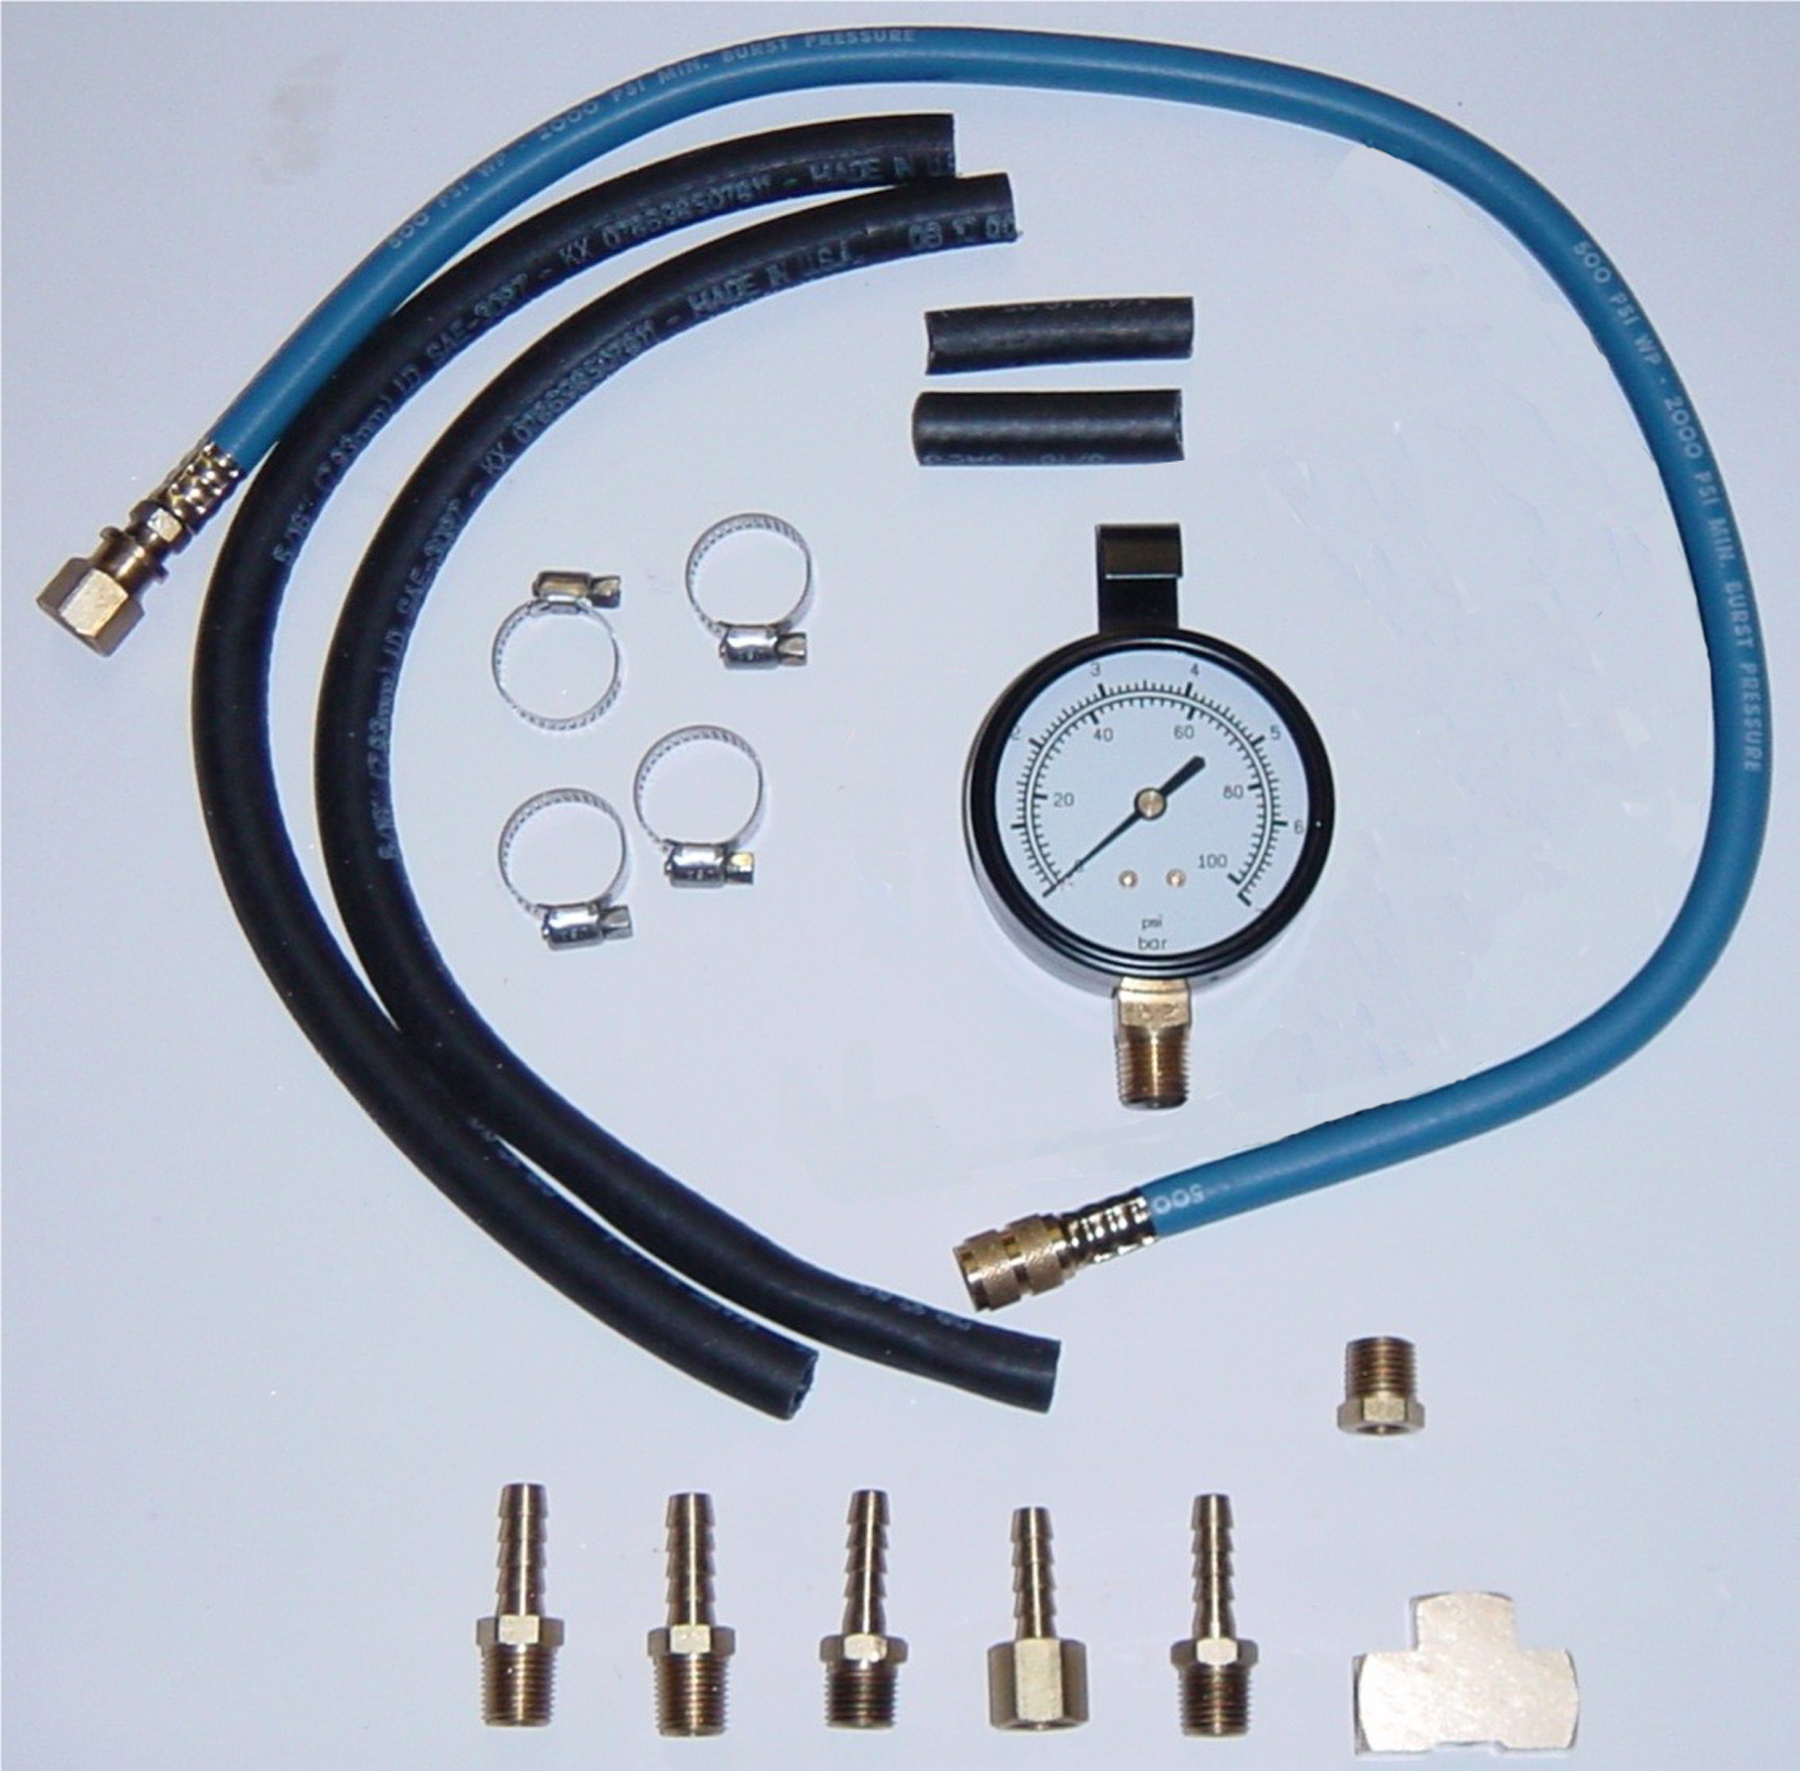 Ford fuel injection pressure tester